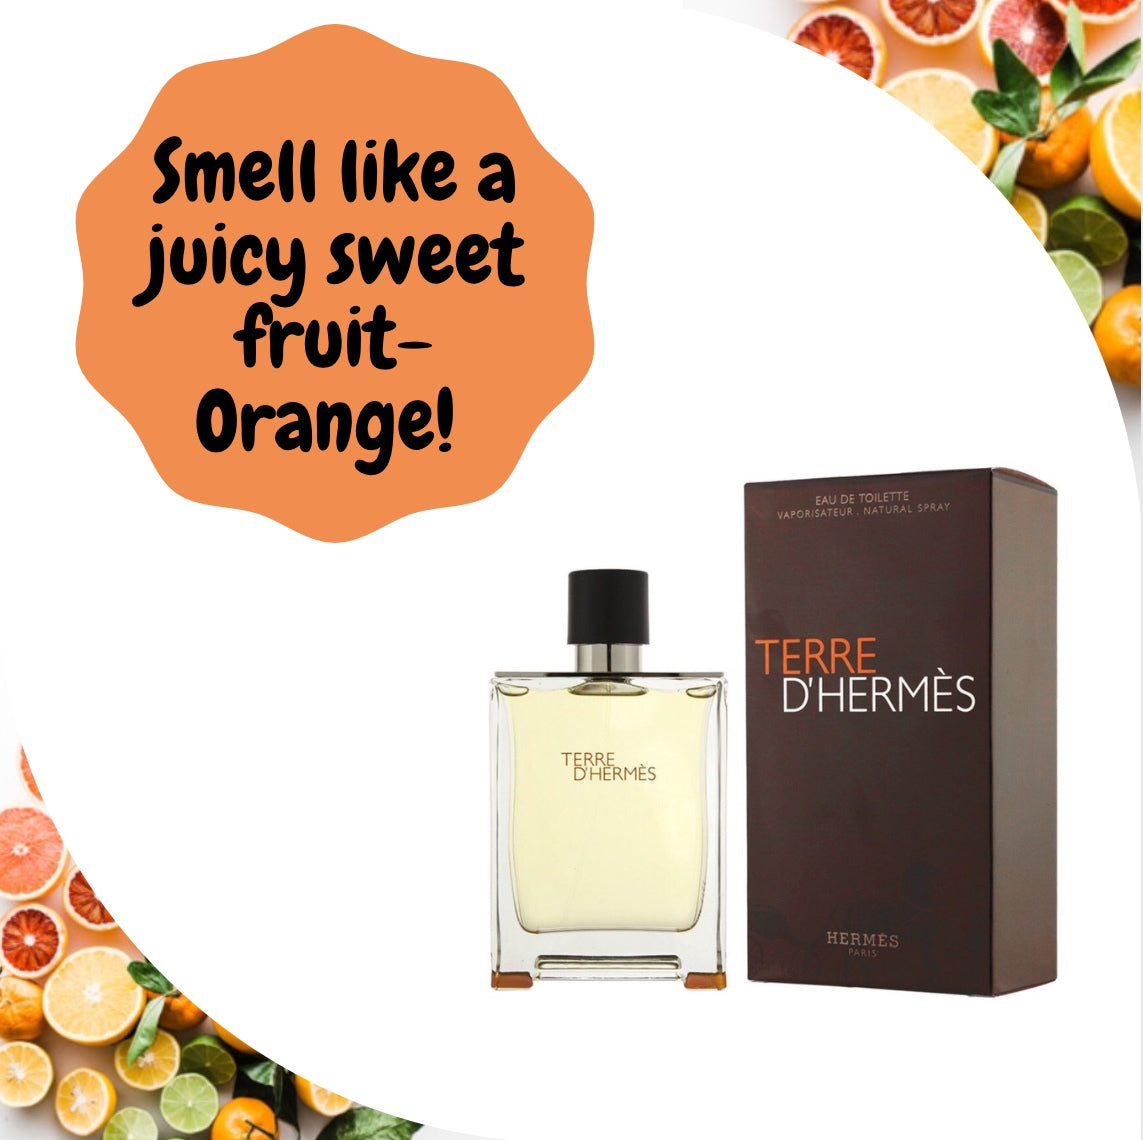 HERE IS YOUR CHANCE TO SMELL LIKE A JUICY SWEET FRUIT- Orange!